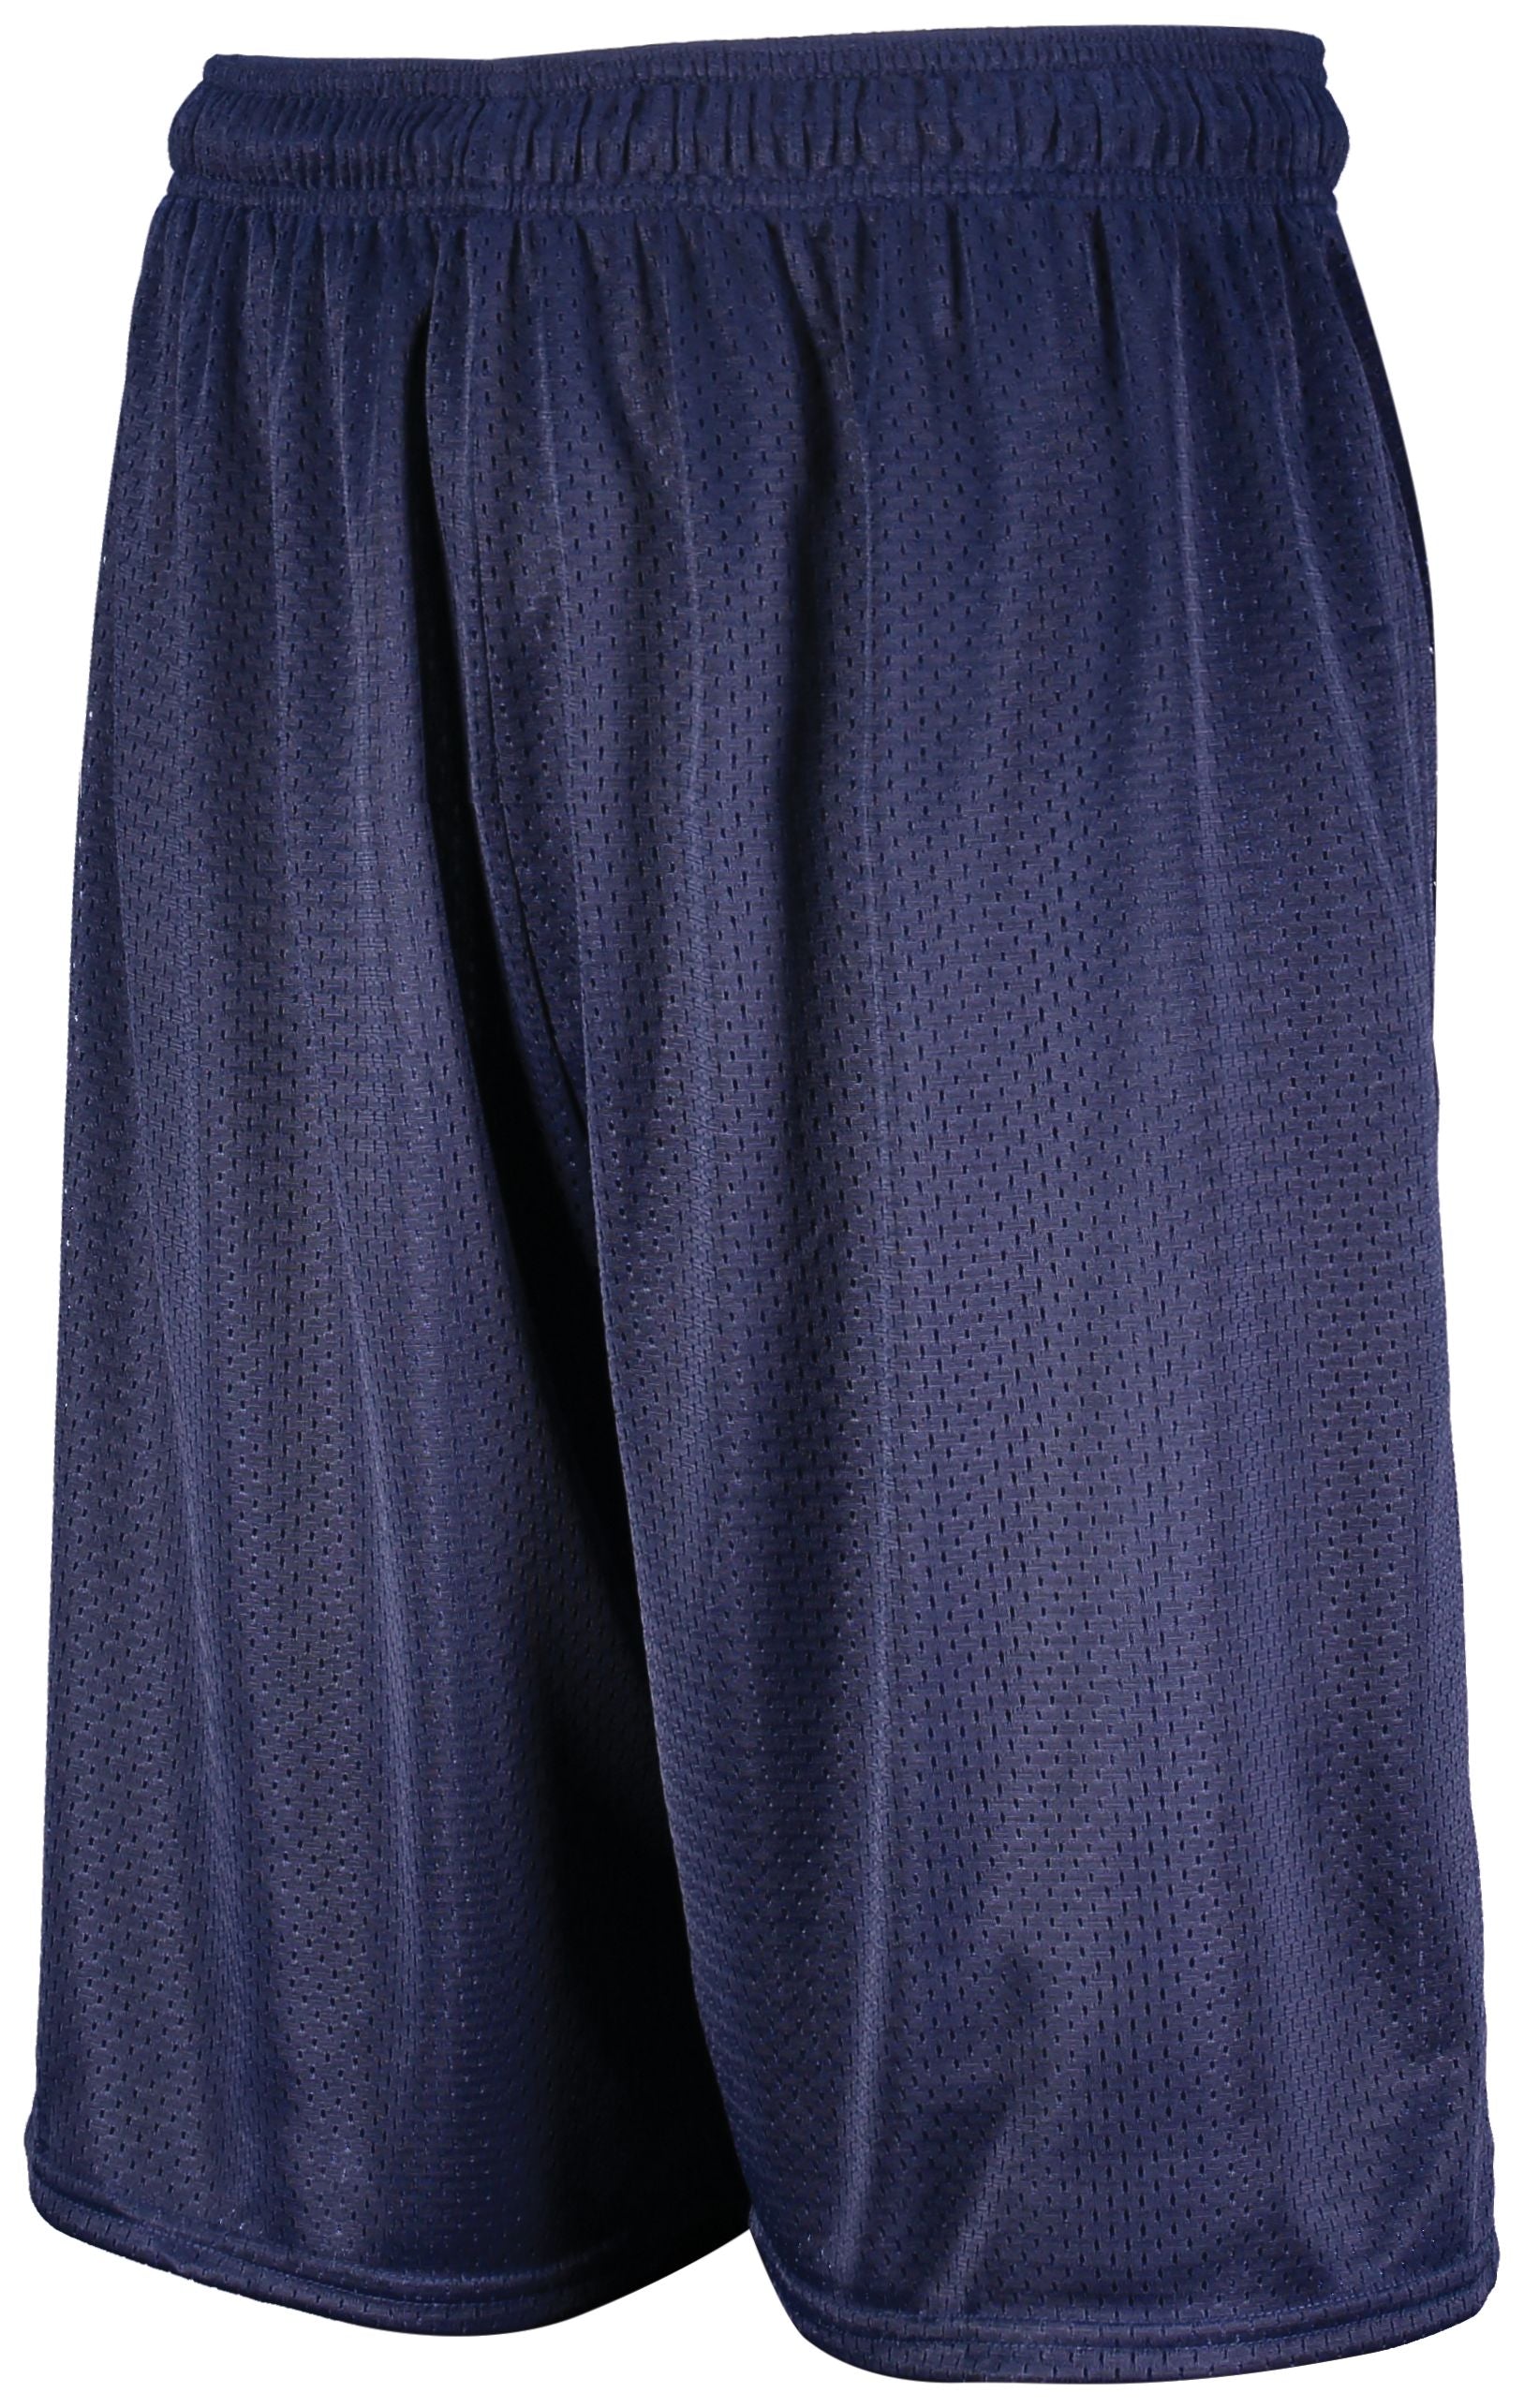 Russell Athletic Youth Dri-Power Mesh Shorts in Navy  -Part of the Youth, Youth-Shorts, Russell-Athletic-Products product lines at KanaleyCreations.com